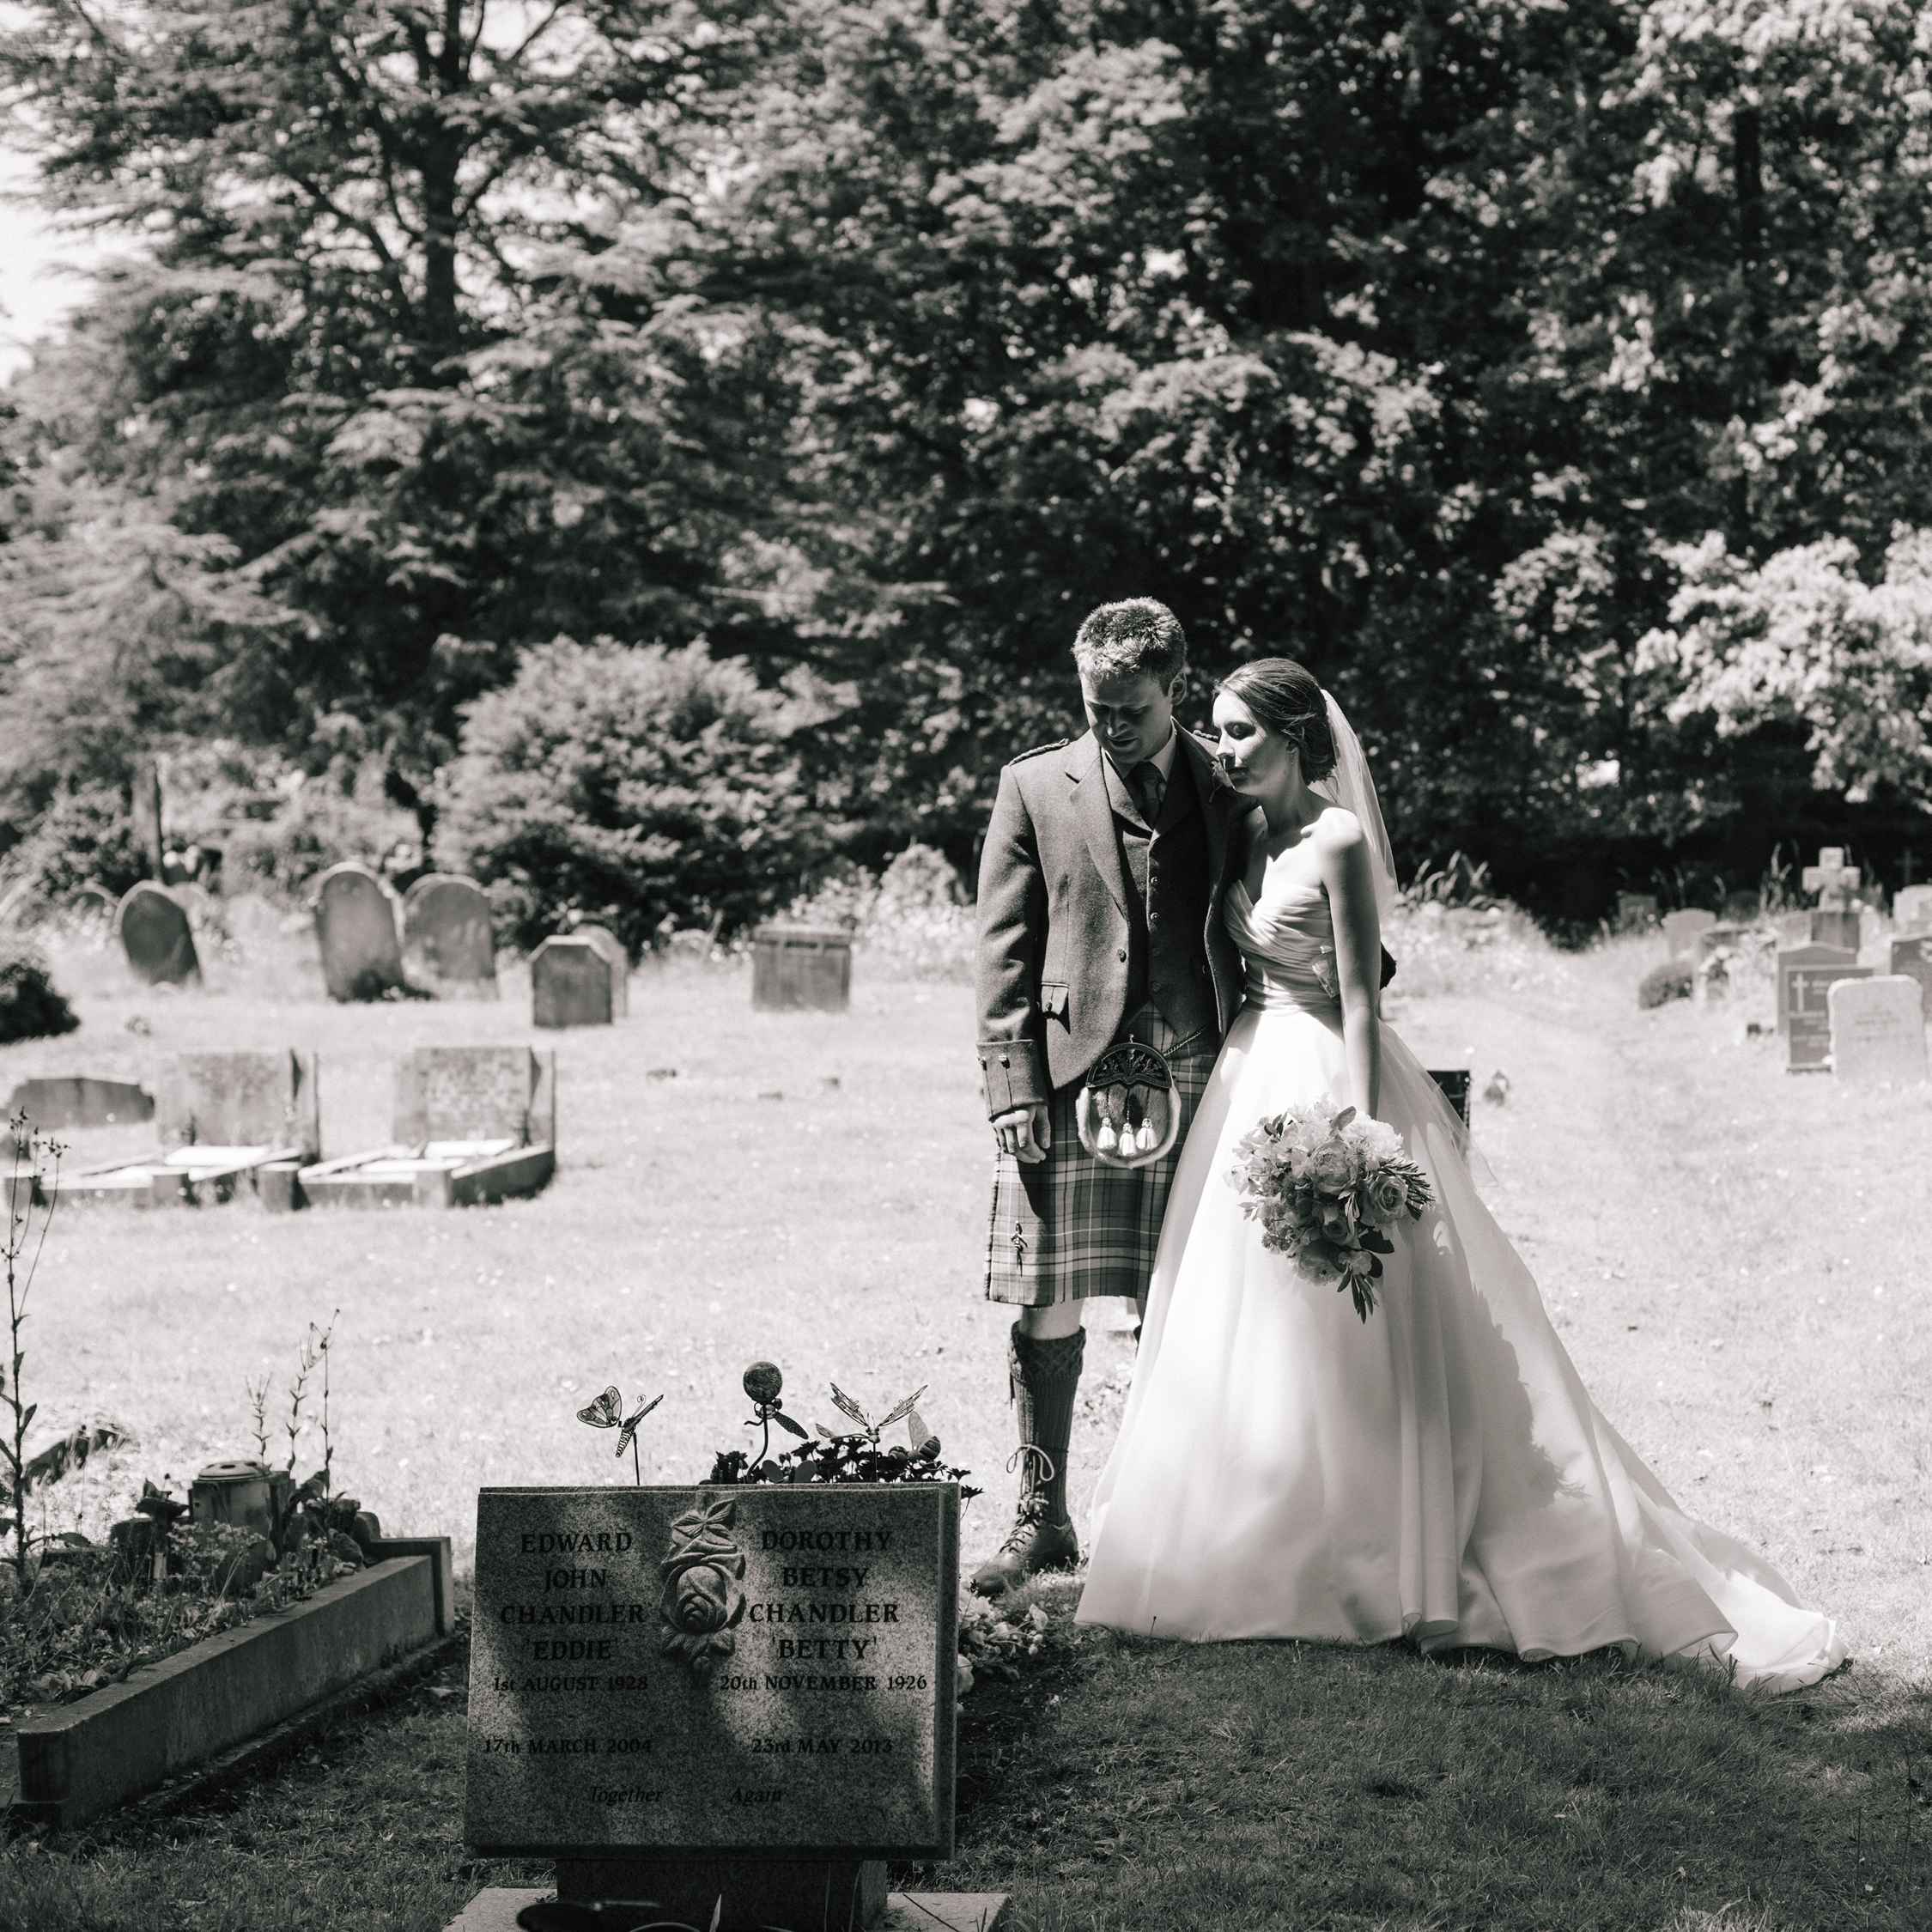 remembering lost loved ones on wedding day, wedding day grave visit